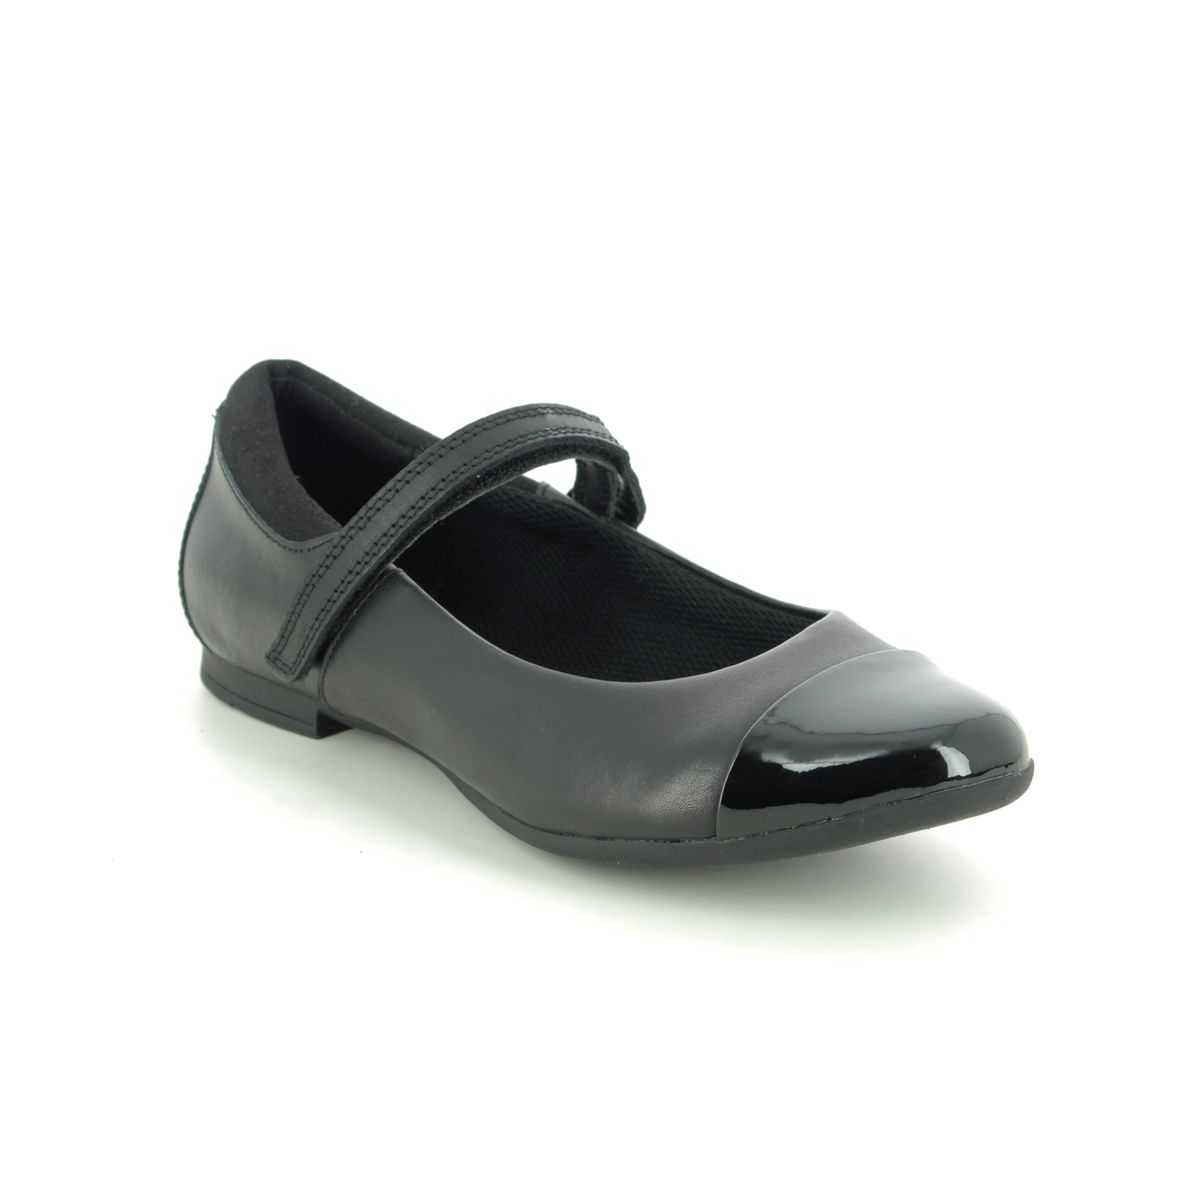 Clarks Scala Gem Y Black Leather Kids Girls School Shoes 495575E In Size 5 In Plain Black Leather E Width Fitting Narrow Fit For School For kids